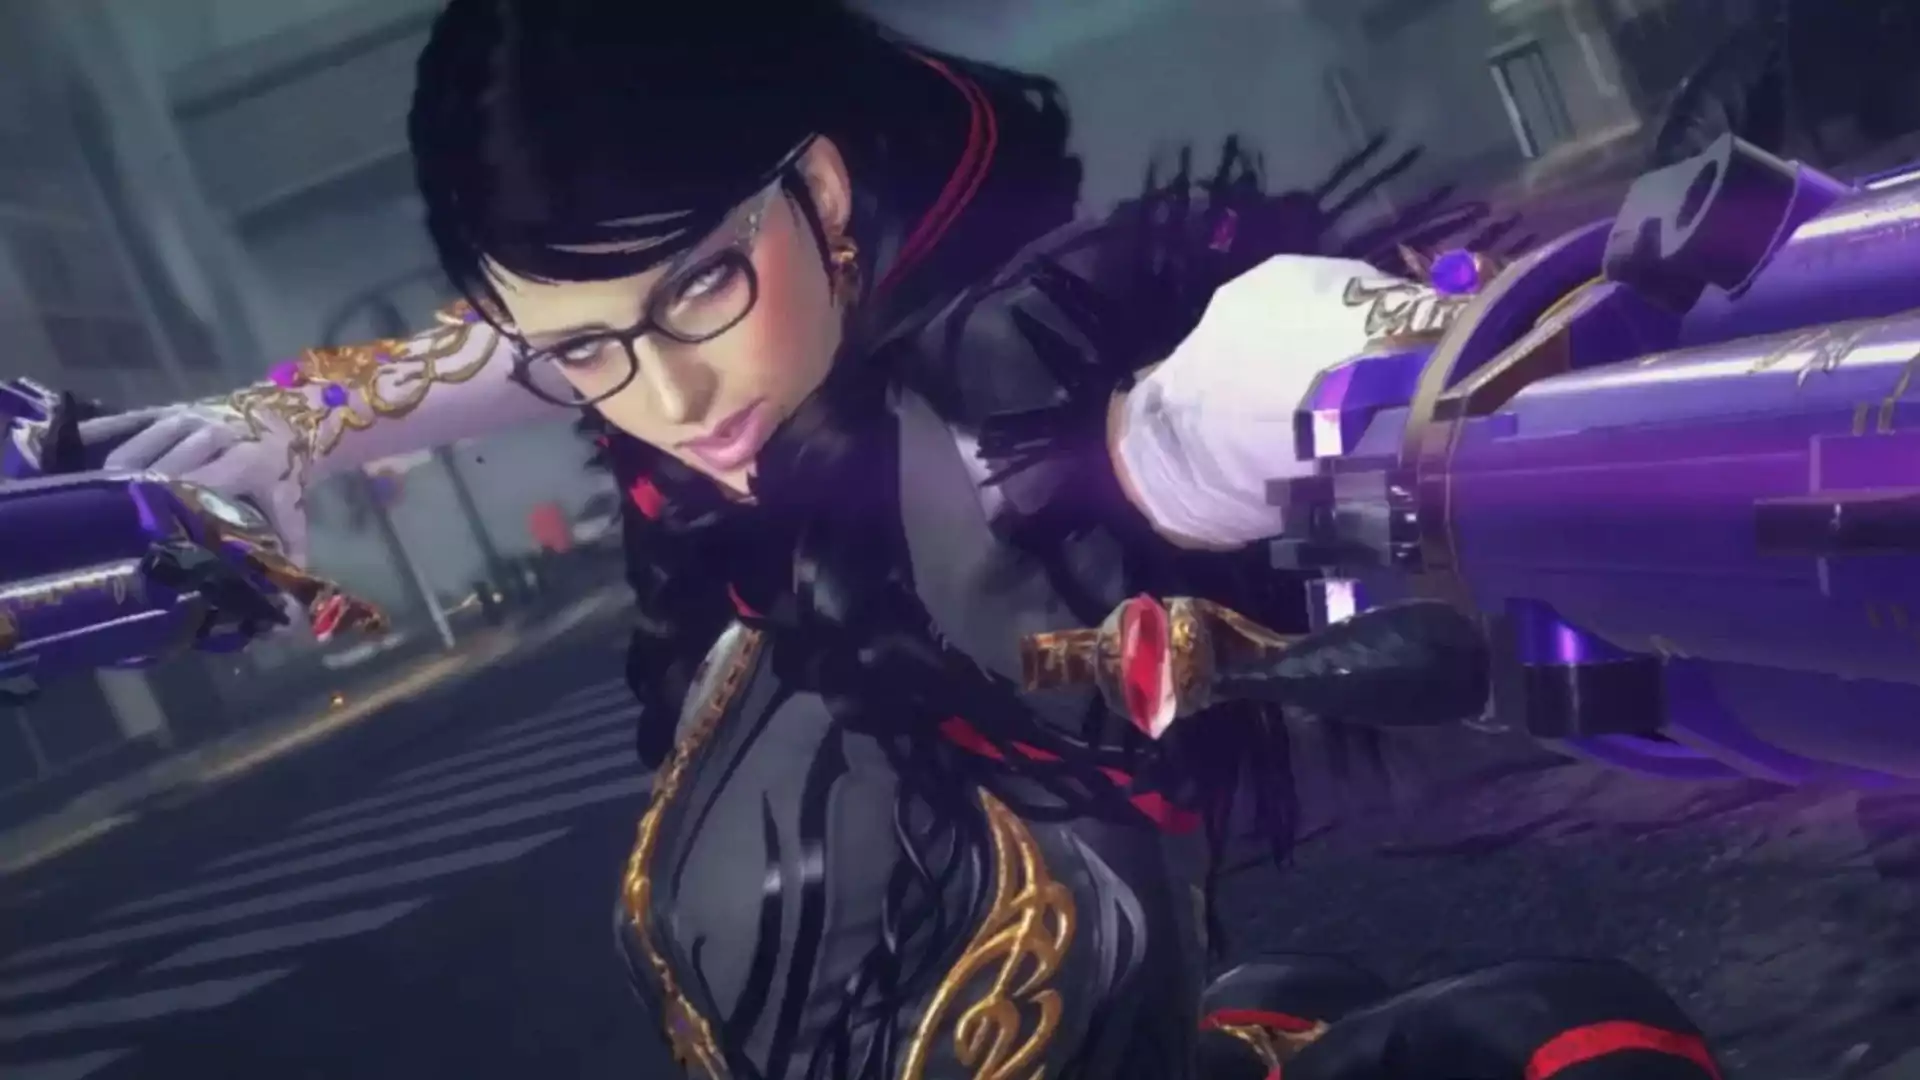 Where to find all records in Bayonetta 3 Collectible locations revealed